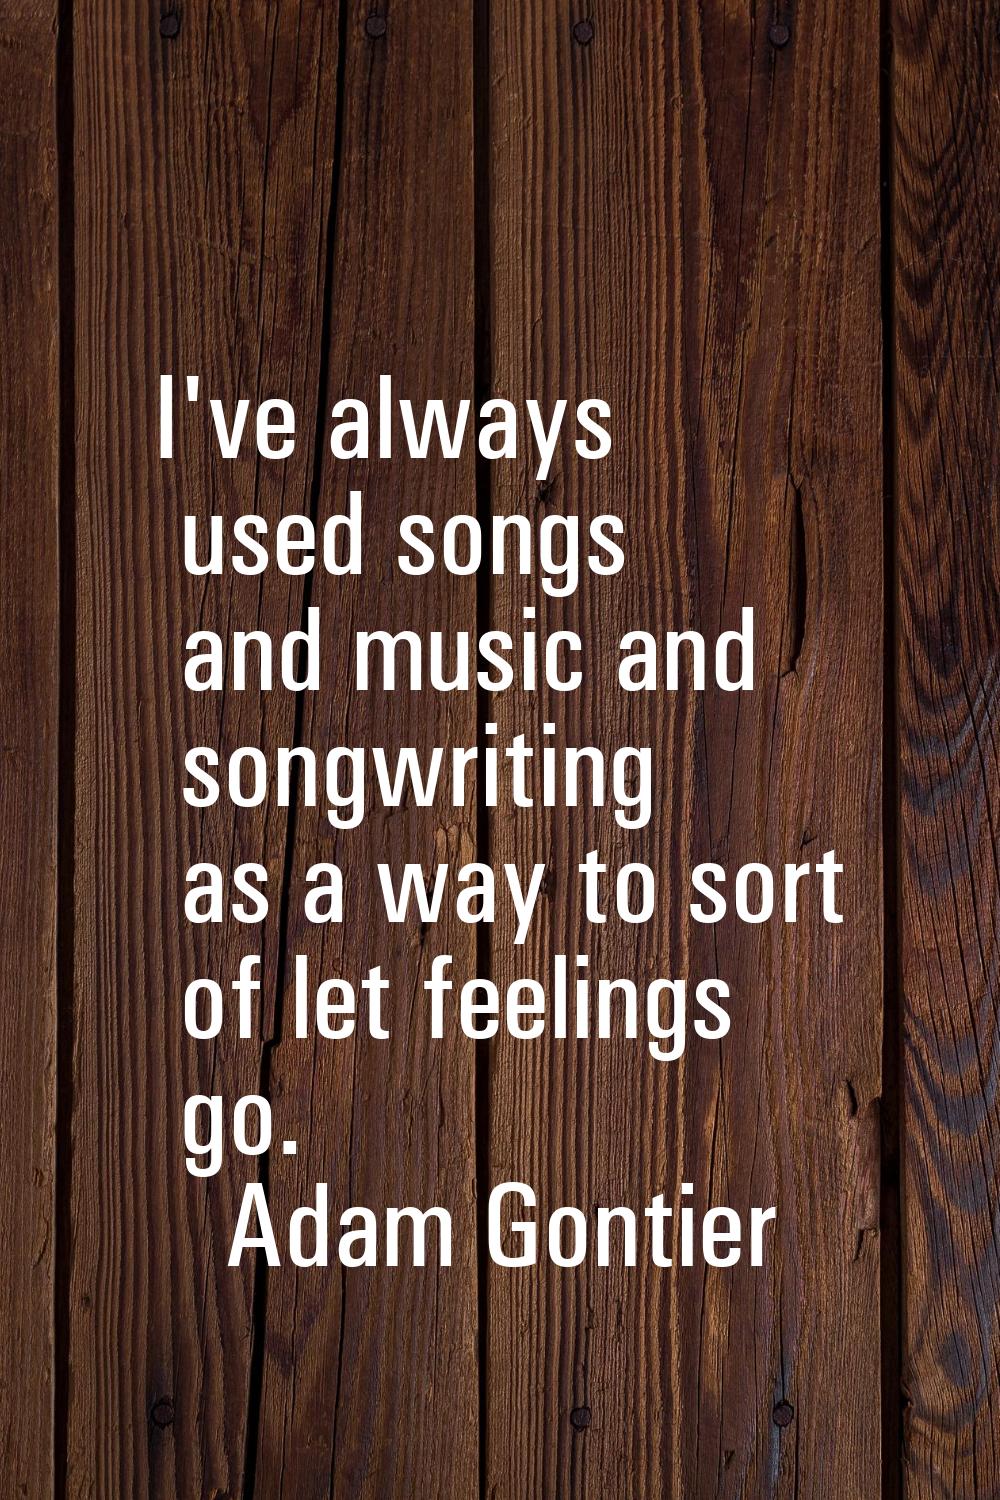 I've always used songs and music and songwriting as a way to sort of let feelings go.